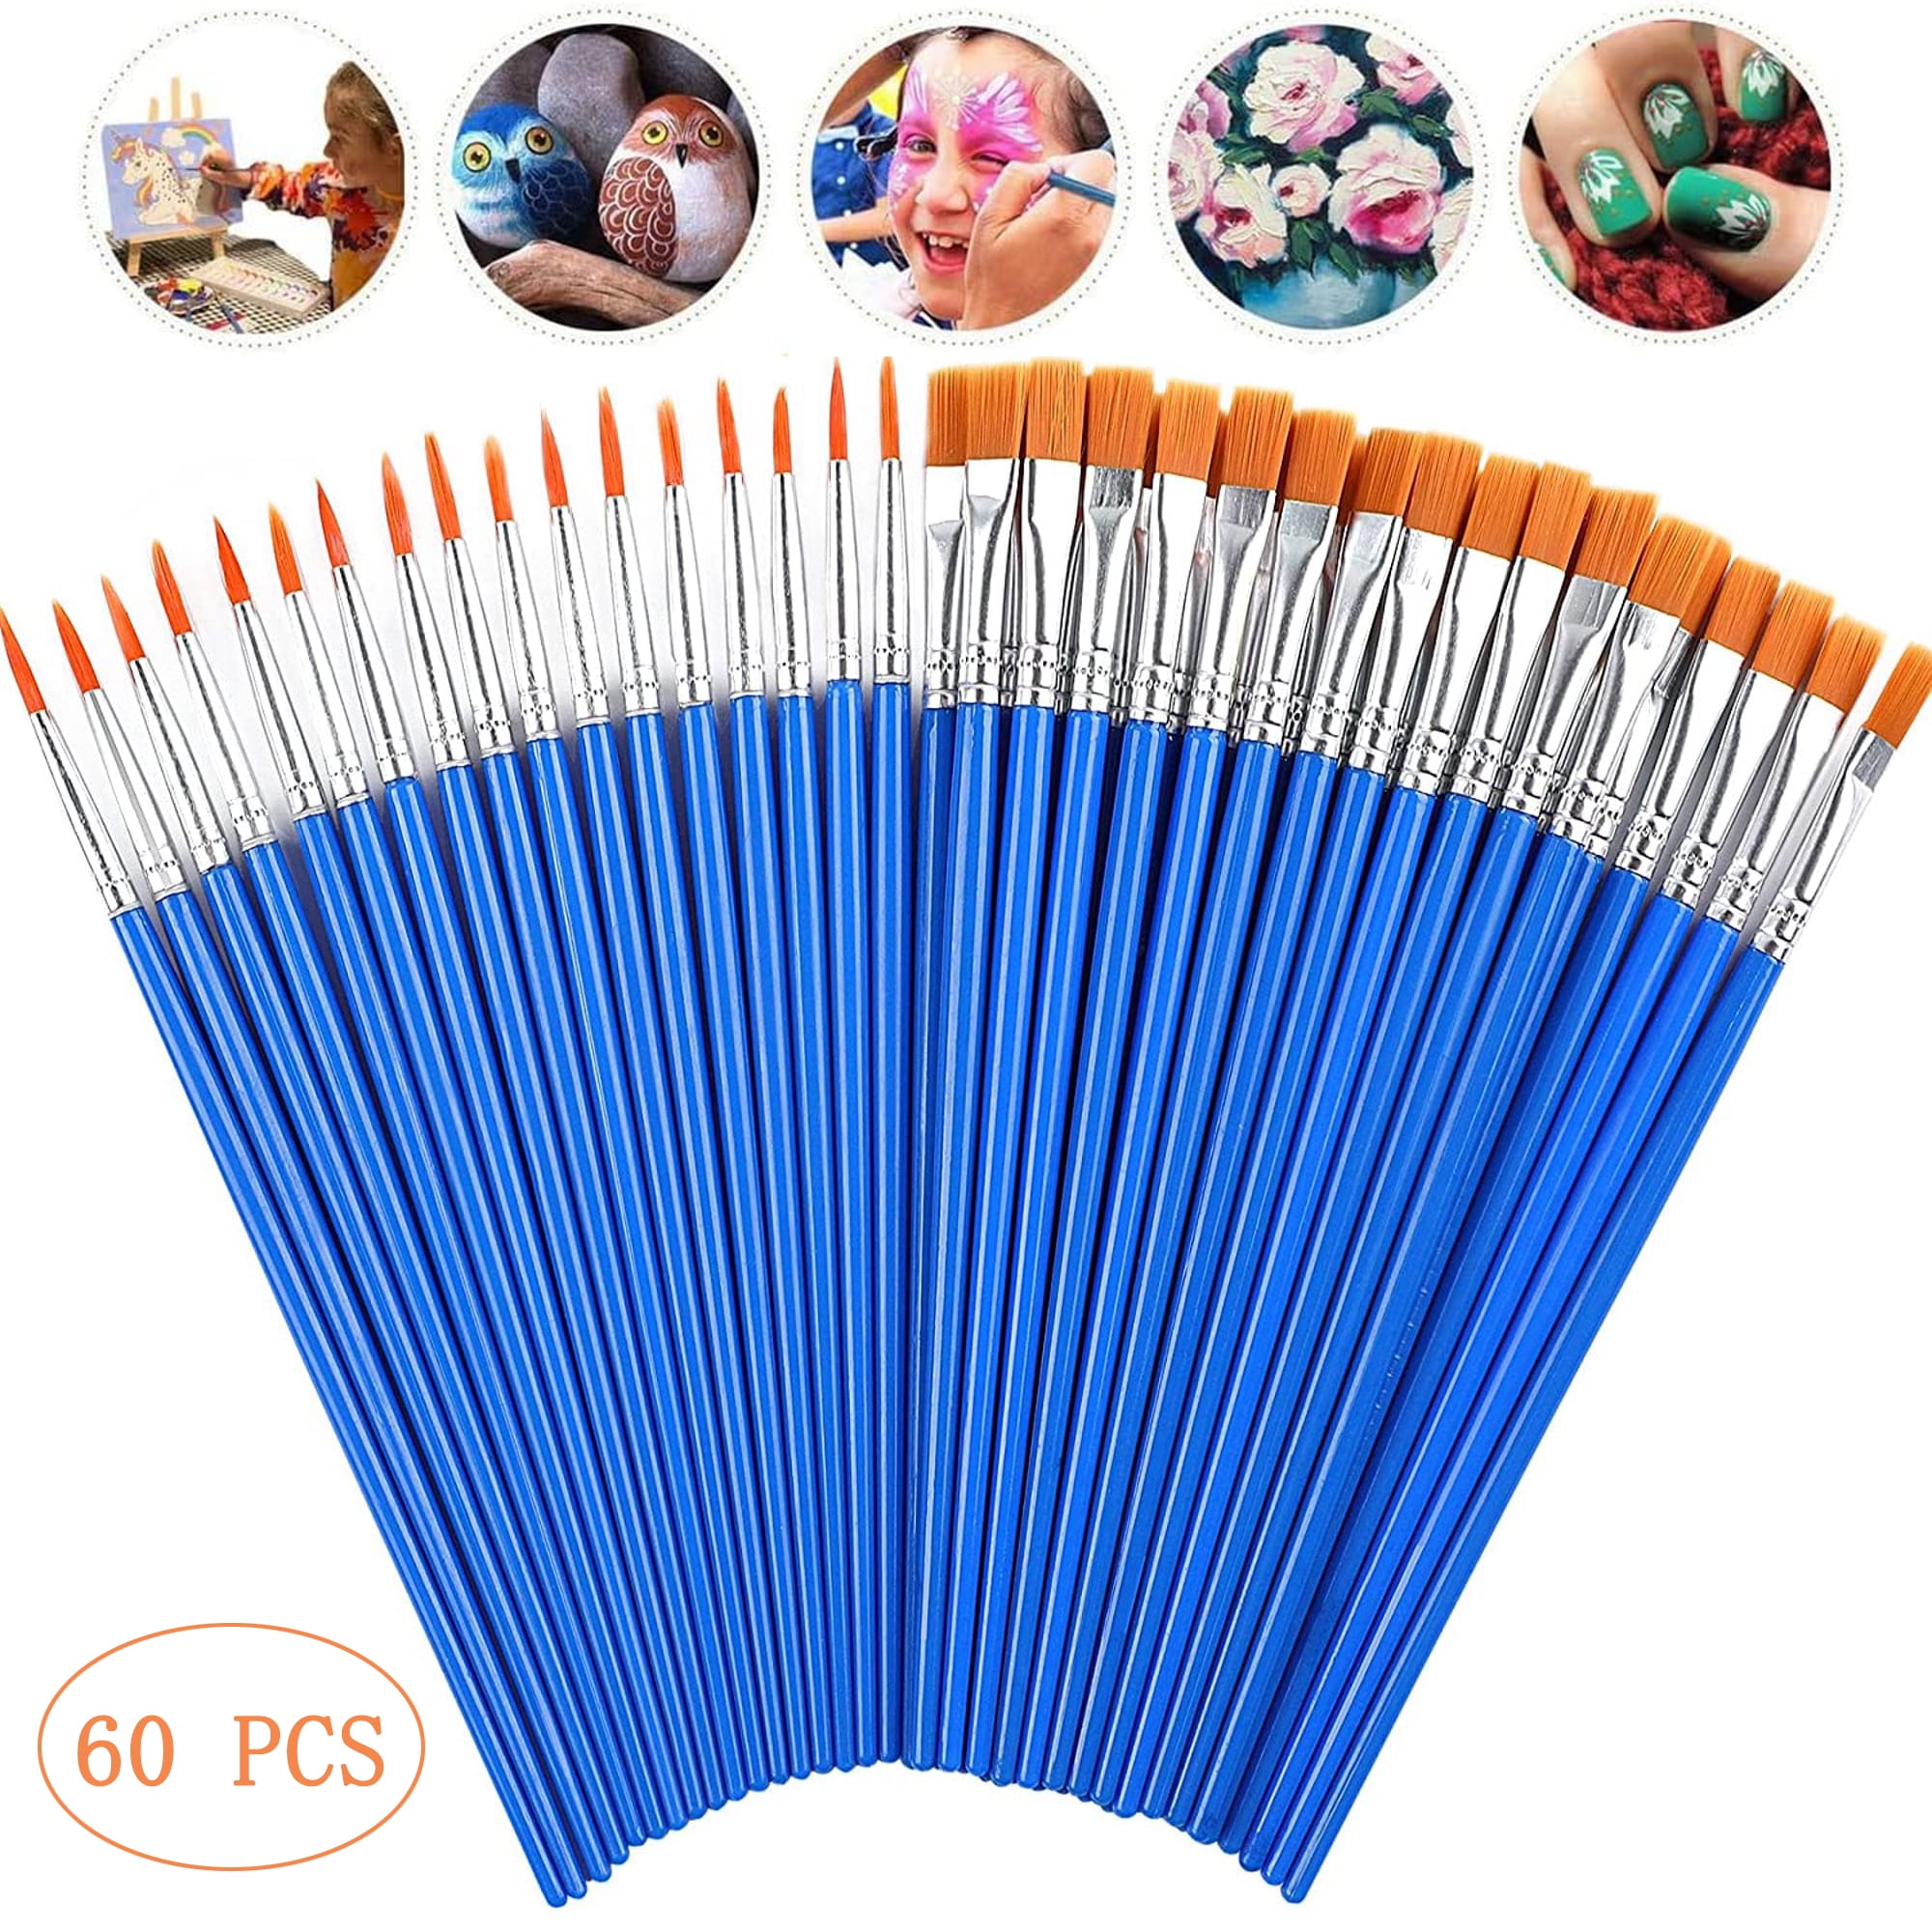 Flat Paint Brush Bristle Material Craft Paint Brushes Aluminum Tube  Interface For Acrylic Painting For Oil Painting - Art Markers - AliExpress